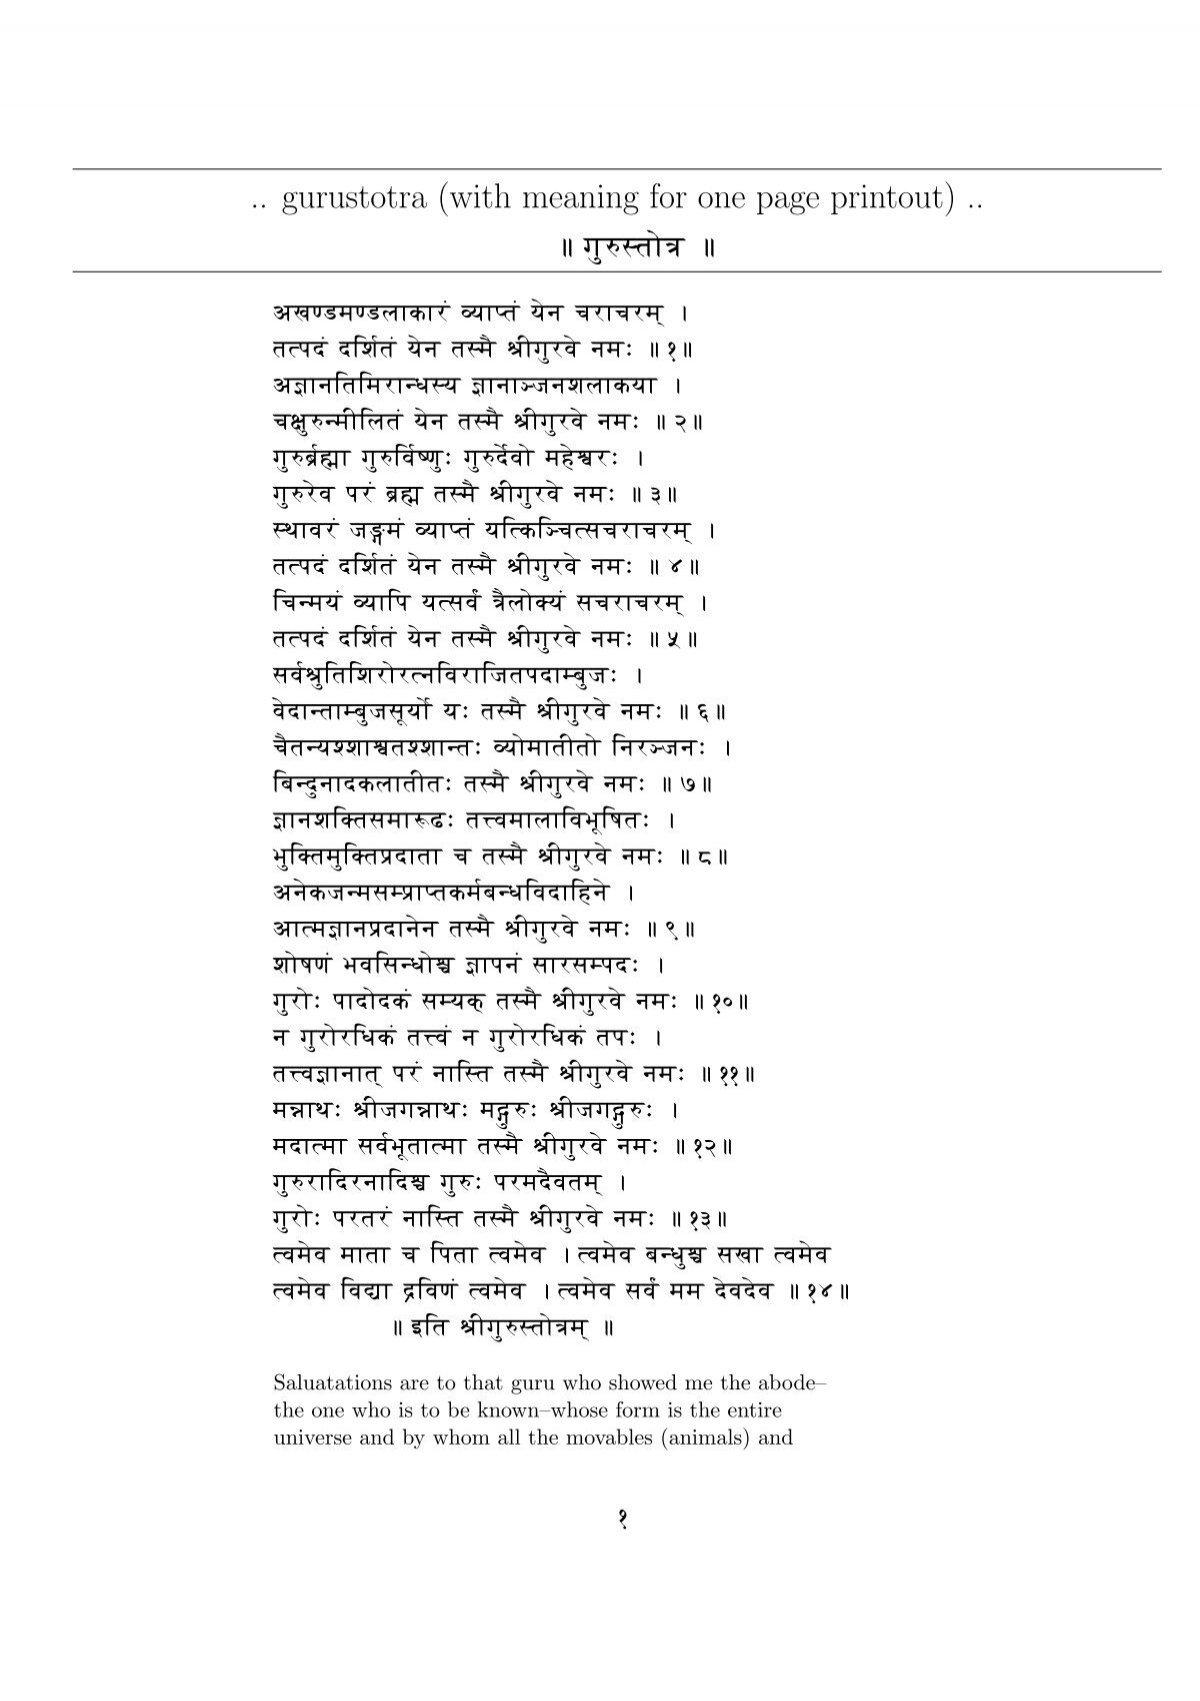 gurustotra-with-meaning-for-one-page-printout-sanskrit-documents